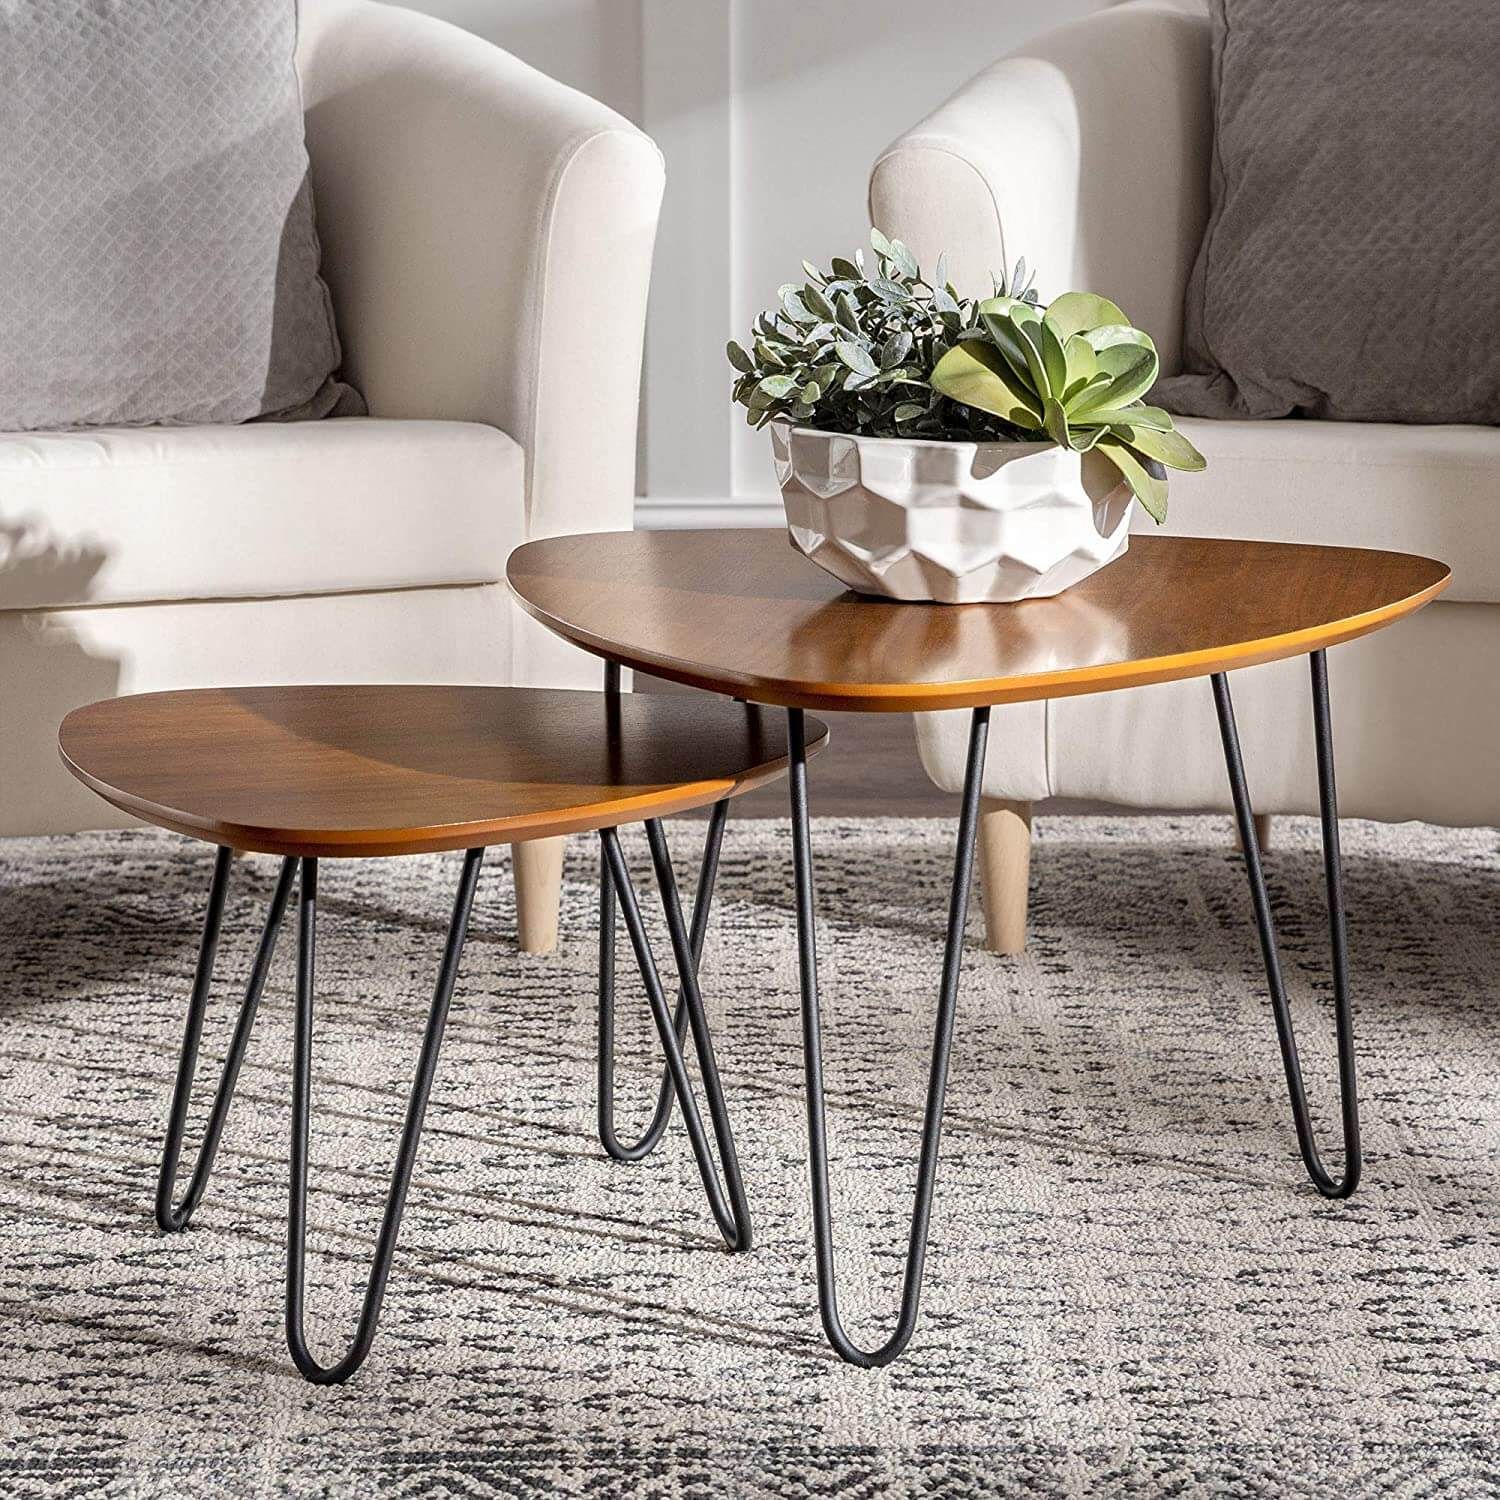 Choosing The Perfect Mid Century Modern Coffee Table – Oceanone Interiors For Mid Century Modern Coffee Tables (View 11 of 20)